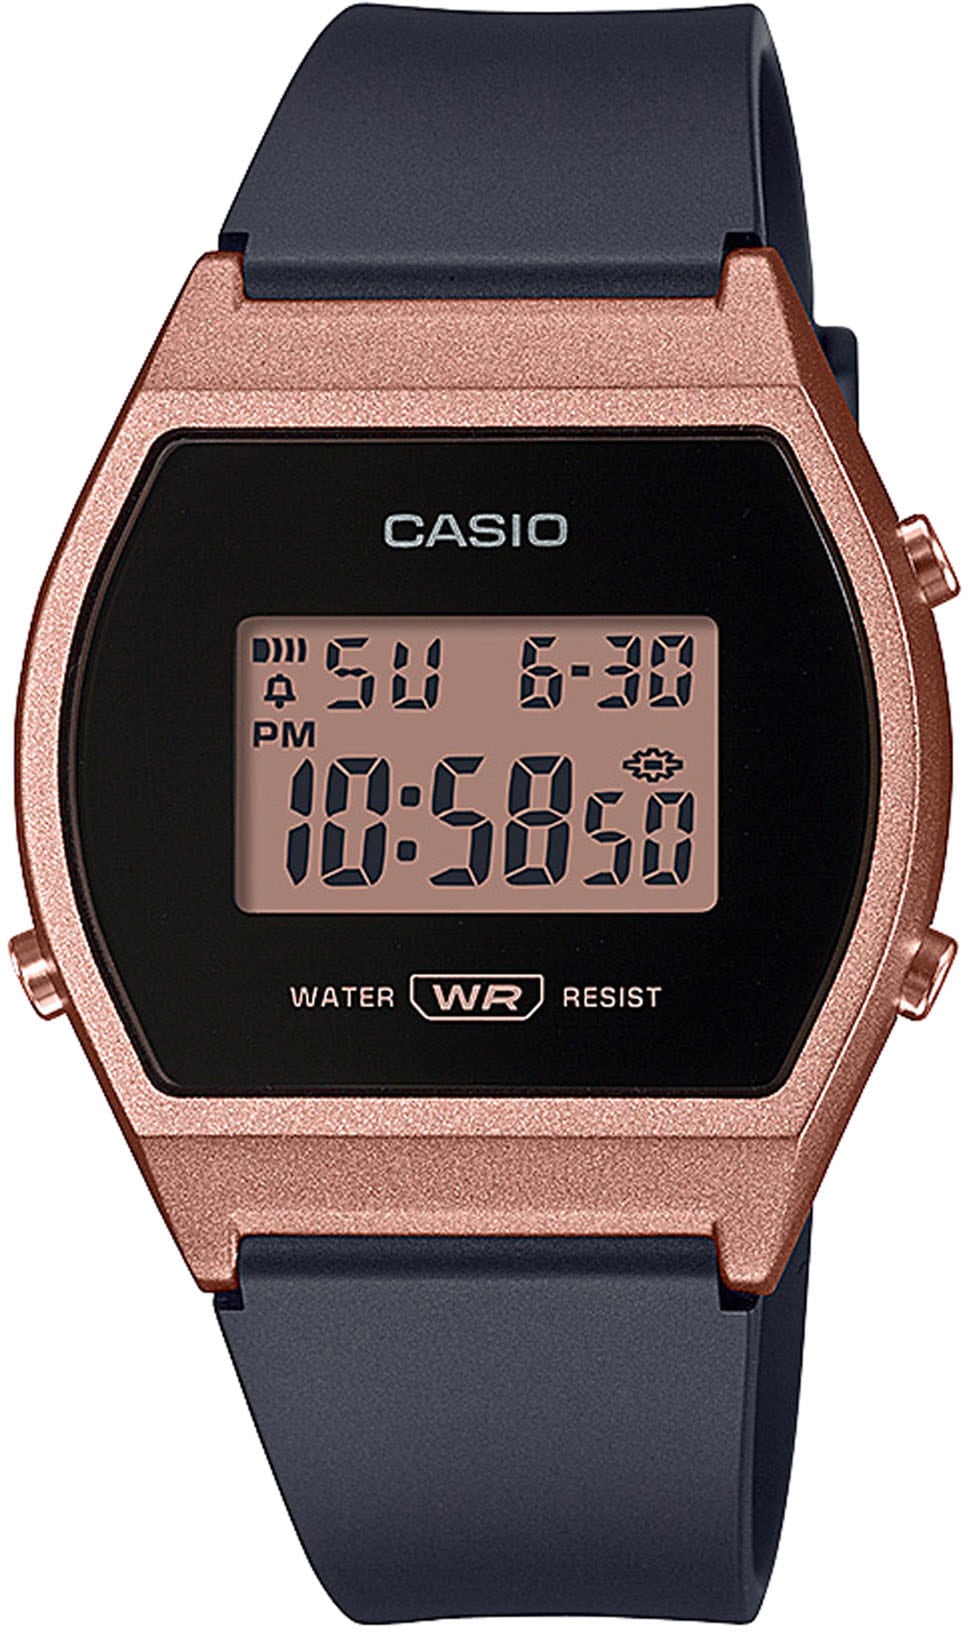 Chronograph bei »LW-204-1AEF« Collection Casio ♕